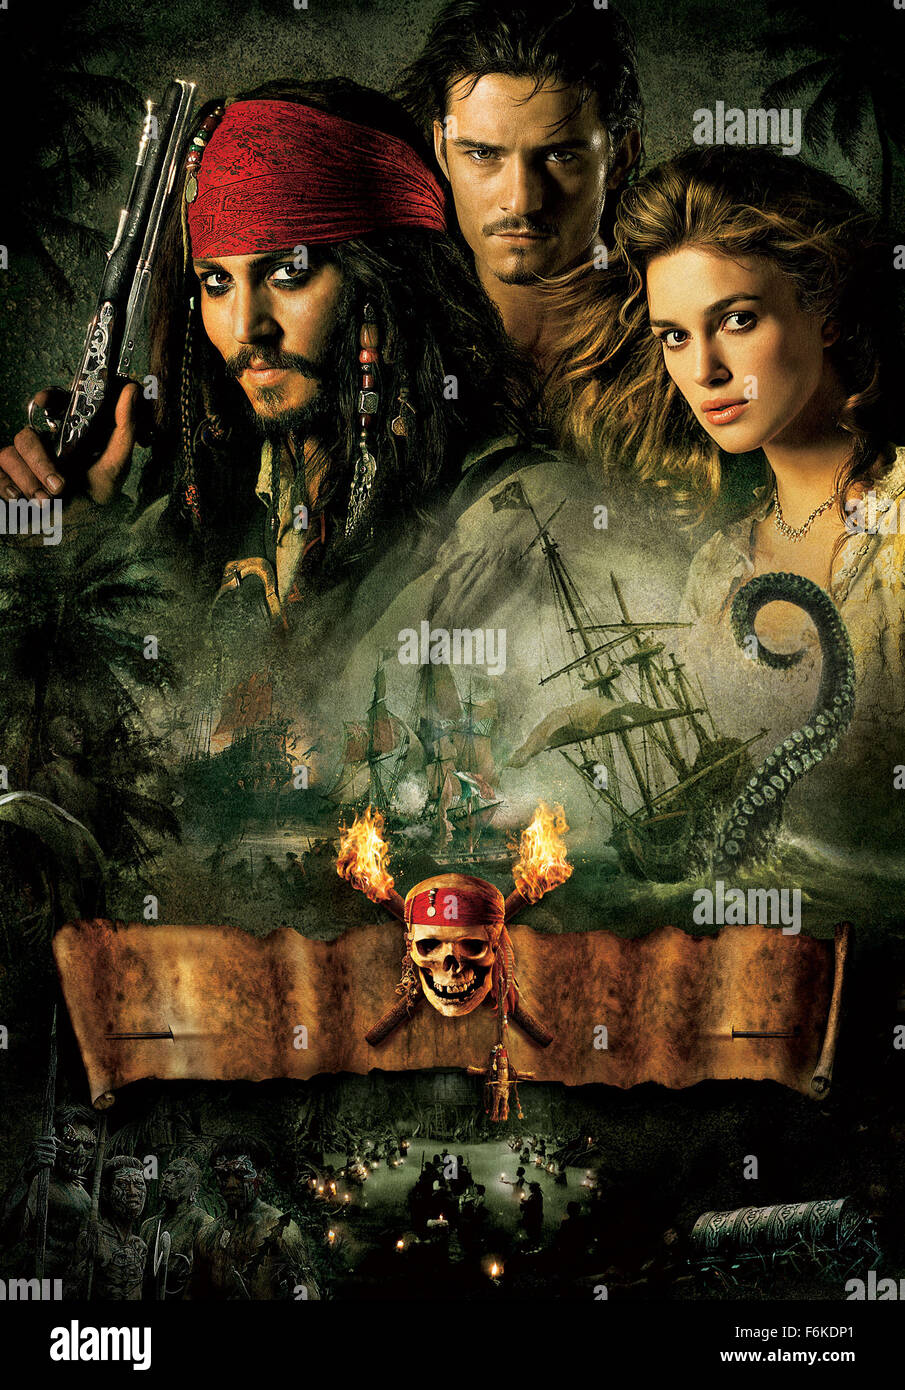 RELEASE DATE: July 7, 2006. MOVIE TITLE: Pirates of the Caribbean: Dead Man's Chest. STUDIO: Walt Disney Pictures. PLOT: Jack Sparrow races to recover the heart of Davy Jones to avoid enslaving his soul to Jones' service, as other friends and foes seek the heart for their own agenda as well. PICTURED: JOHNNY DEPP as Jack Sparrow, ORLANDO BLOOM as Will Turner and KEIRA KNIGHTLEY as Elizabeth Swan, Movie Poster. Stock Photo